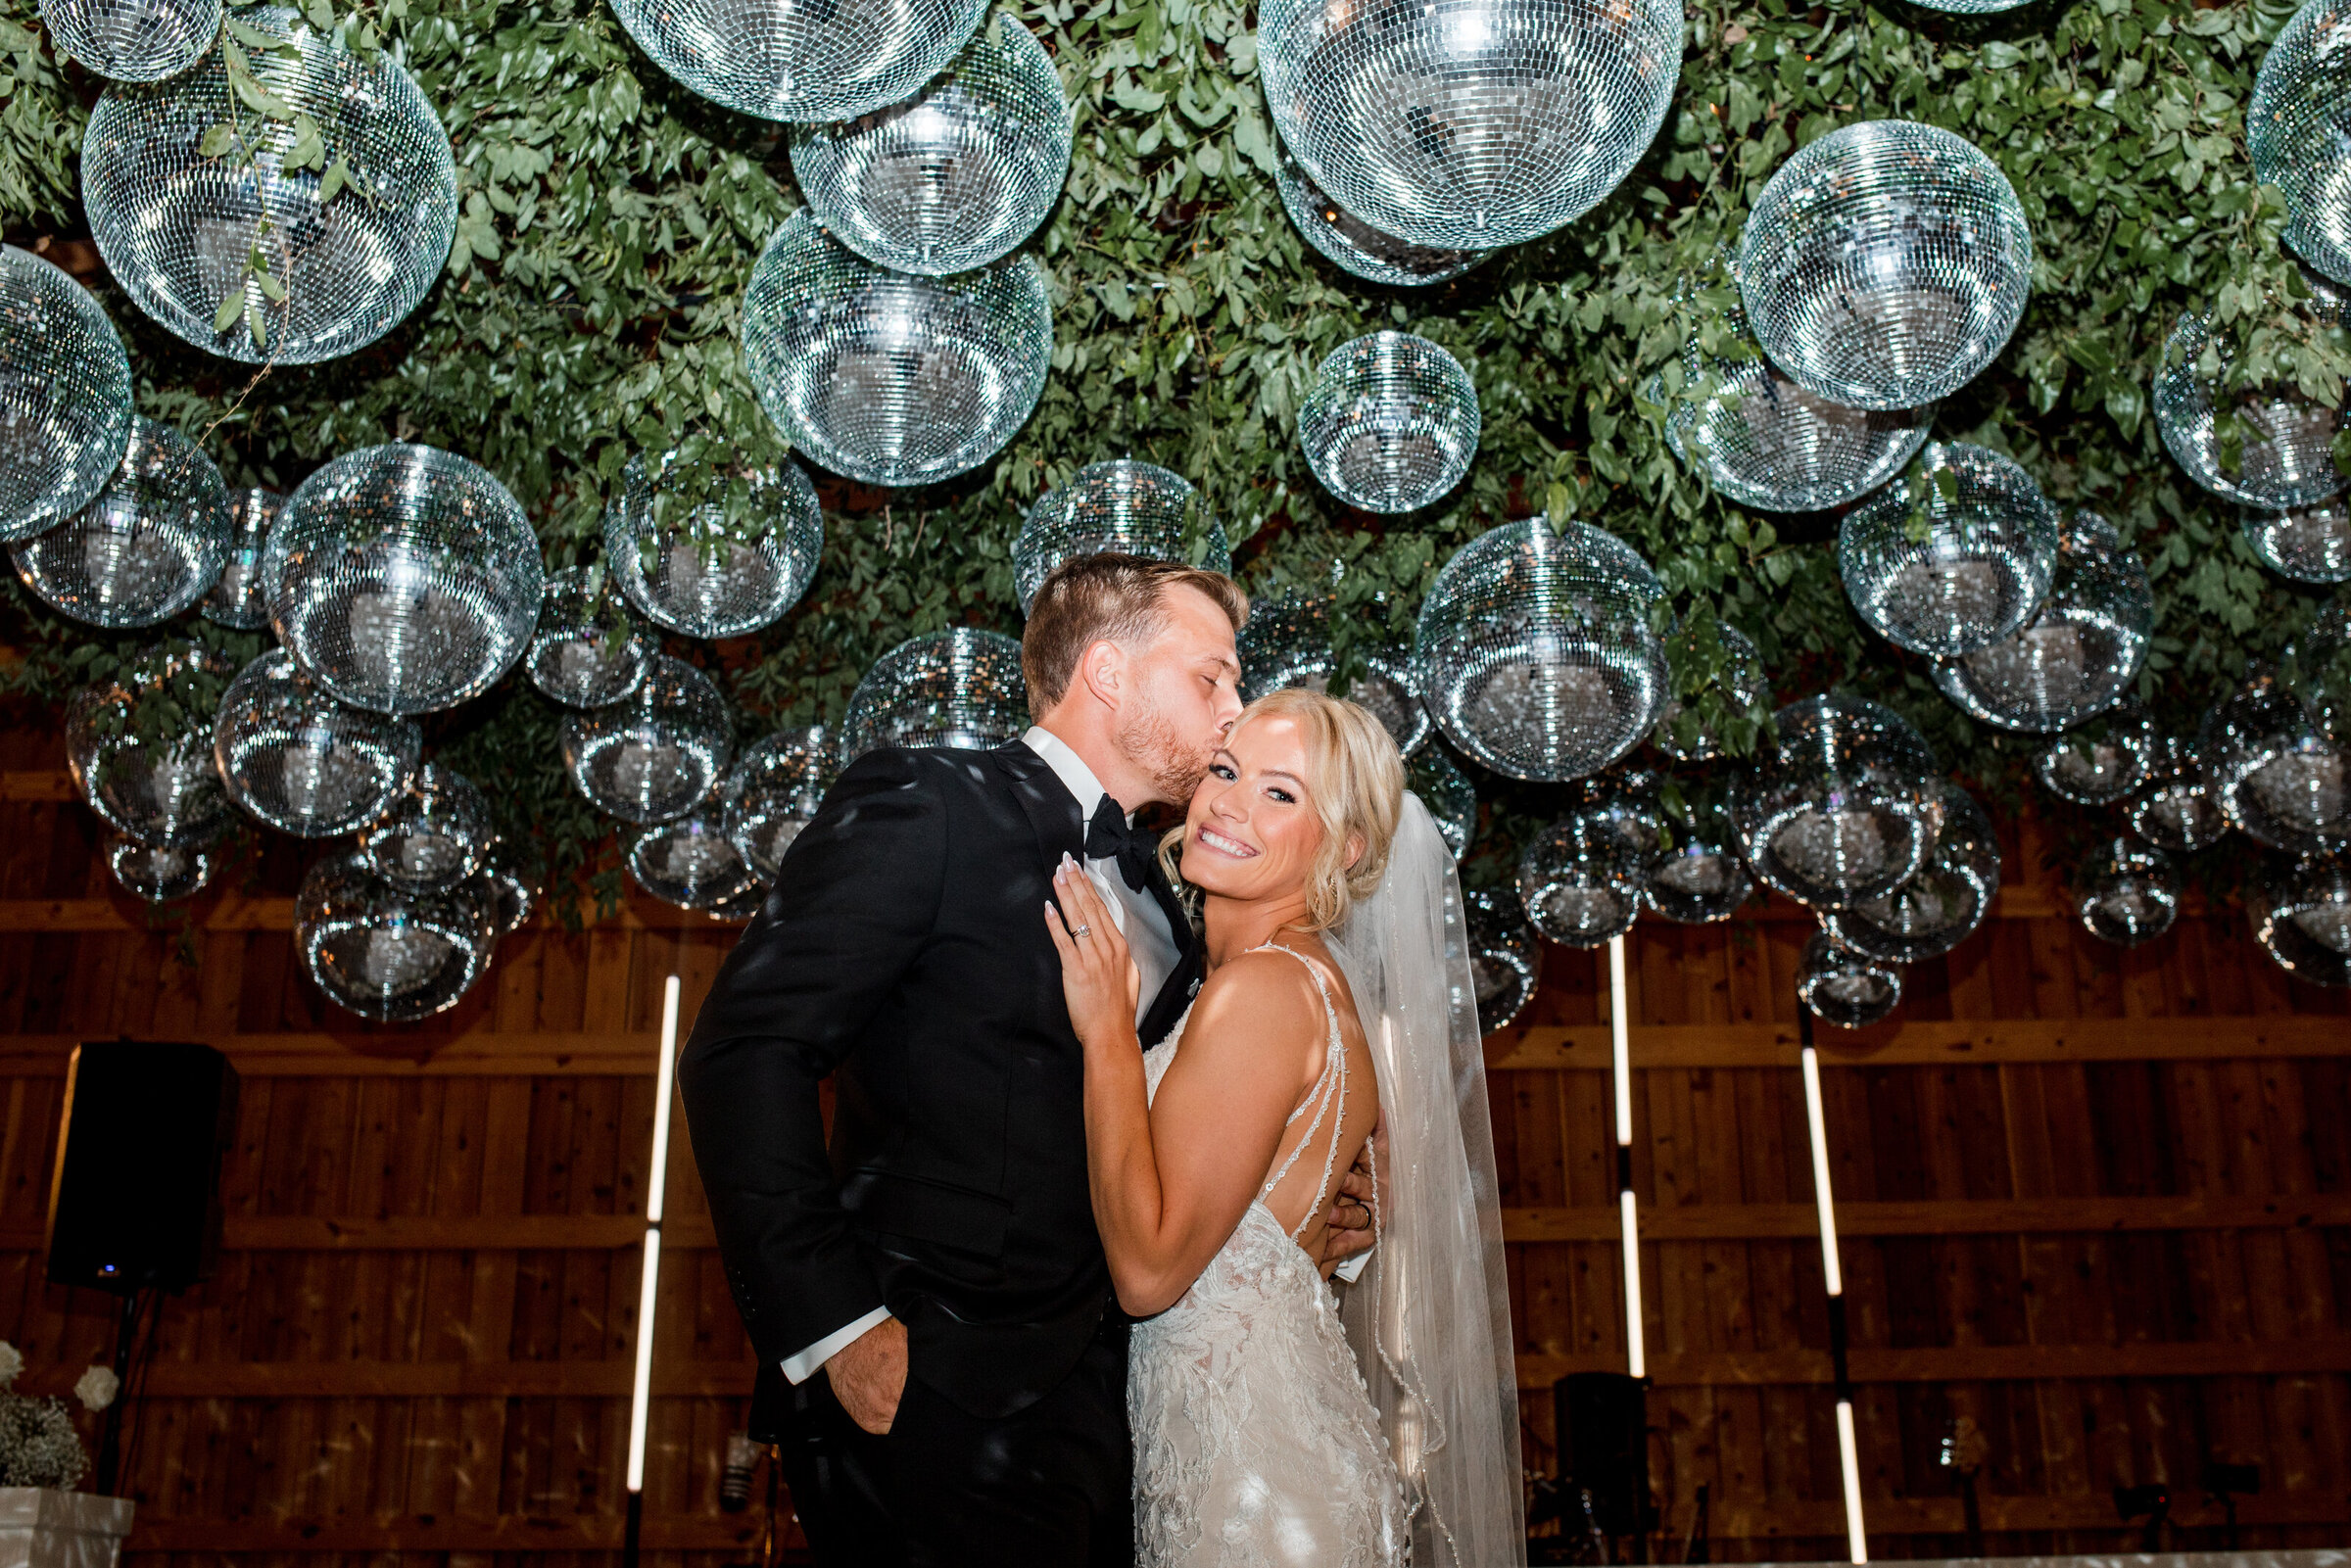 Groom kissing bride during their reception under their greenery and disco ball covered ceiling